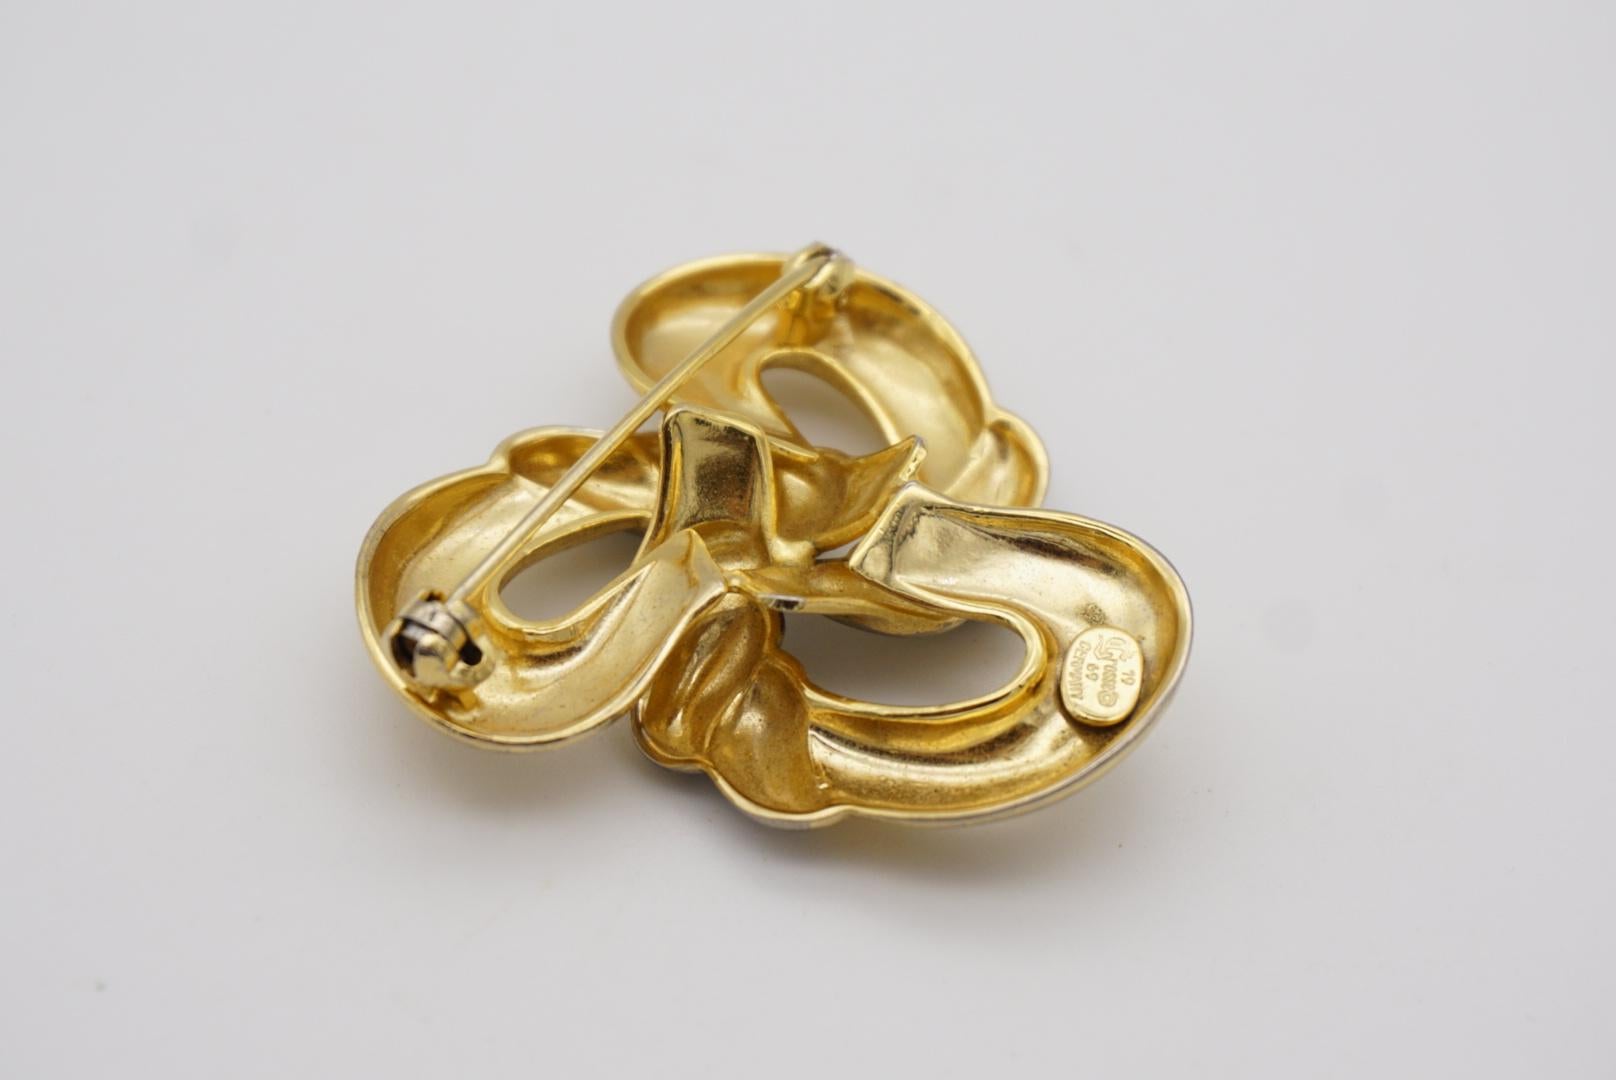 Christian Dior GROSSE 1969 Vintage Trio Knot Bows Swirl Twist Gold Silver Brooch For Sale 4